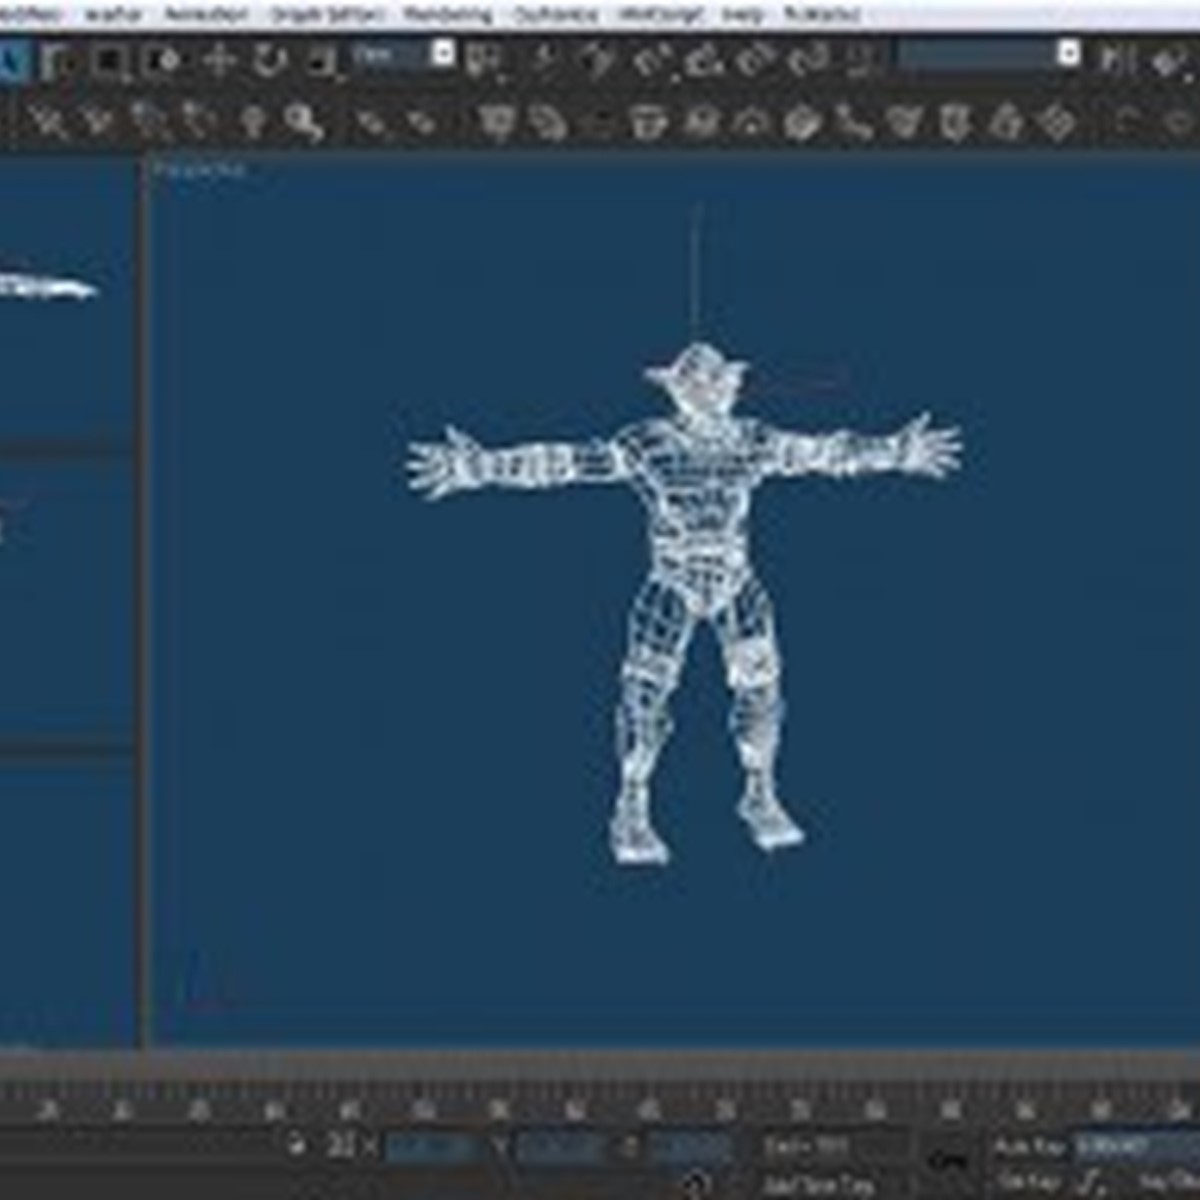 3ds max 2009 portable free download torrent